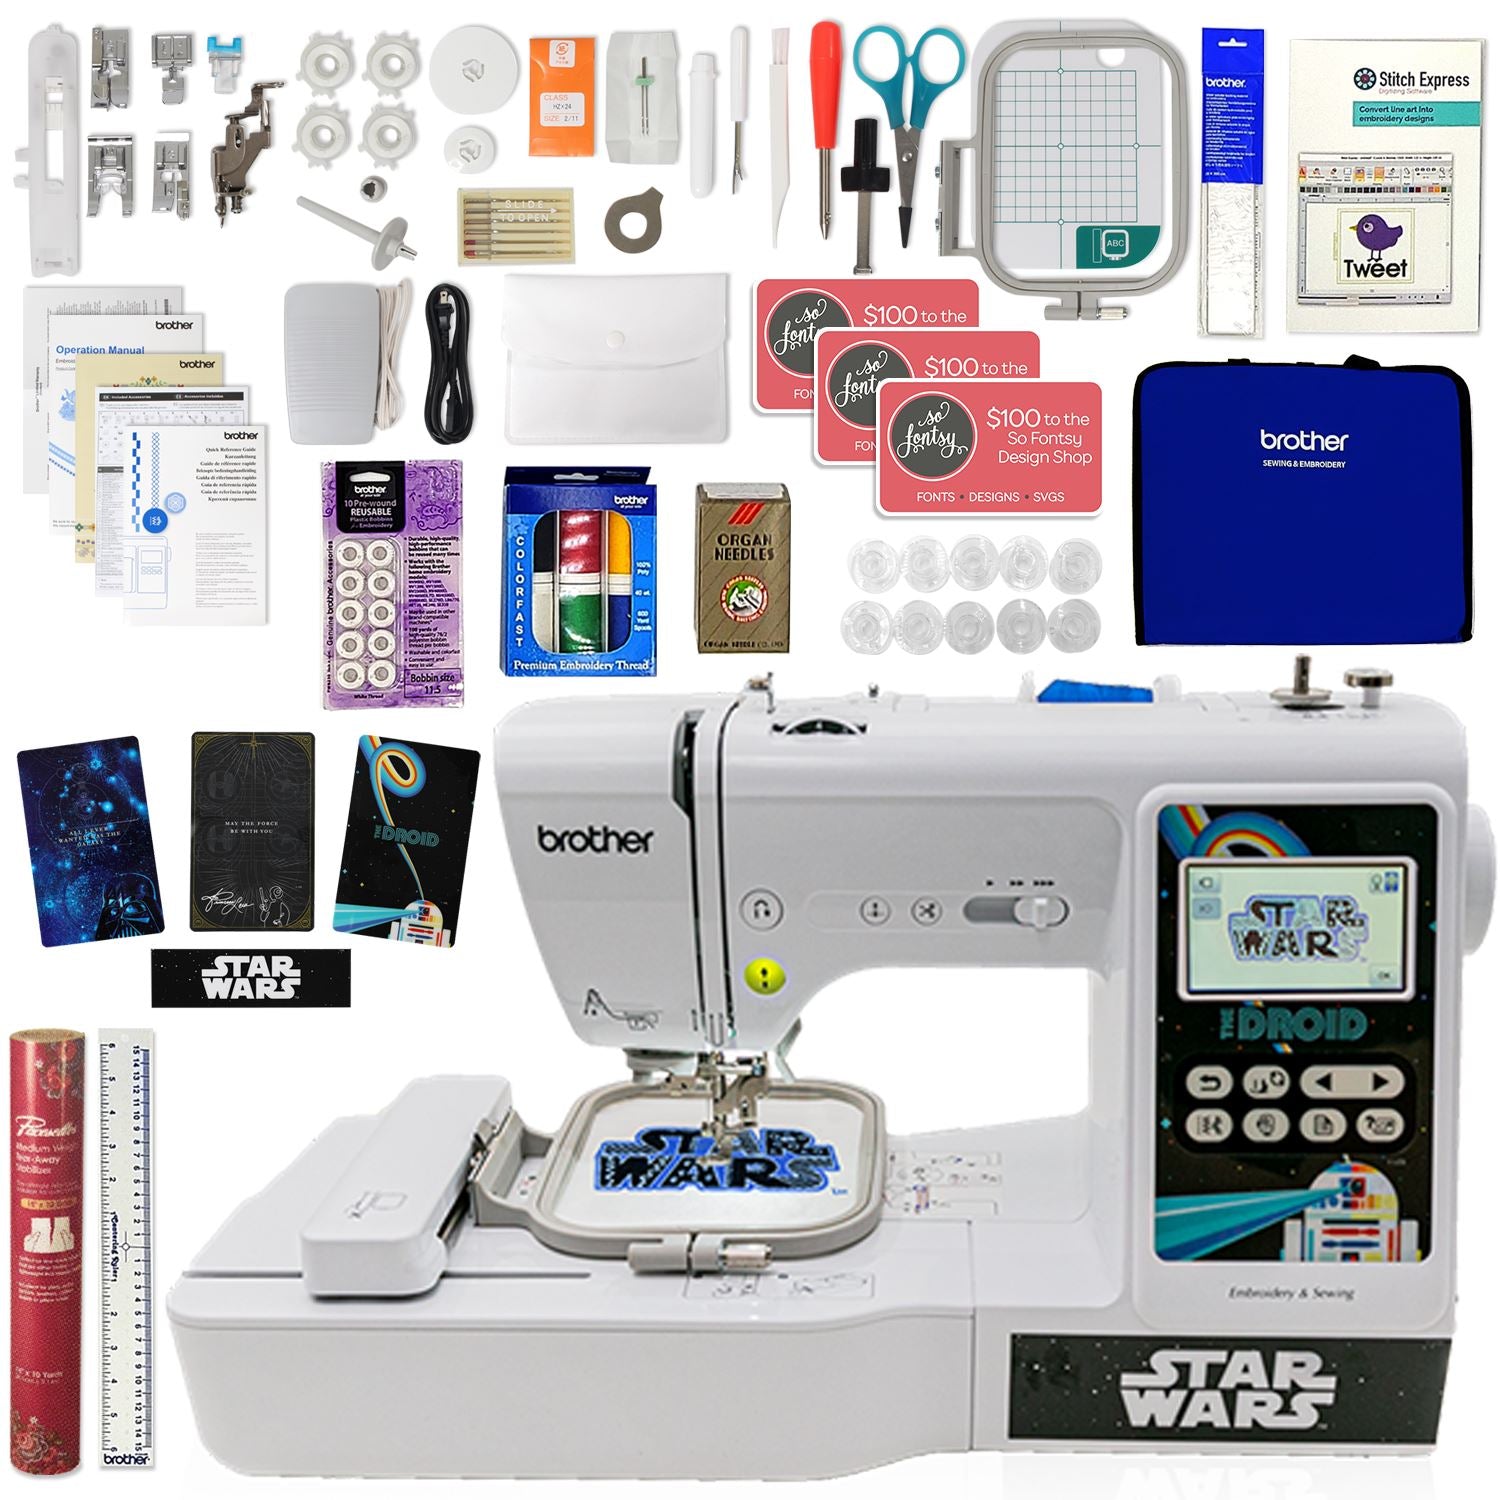 Brother SE700 Embroidery & Sewing Machine w/ Embroidery Kit Bundle